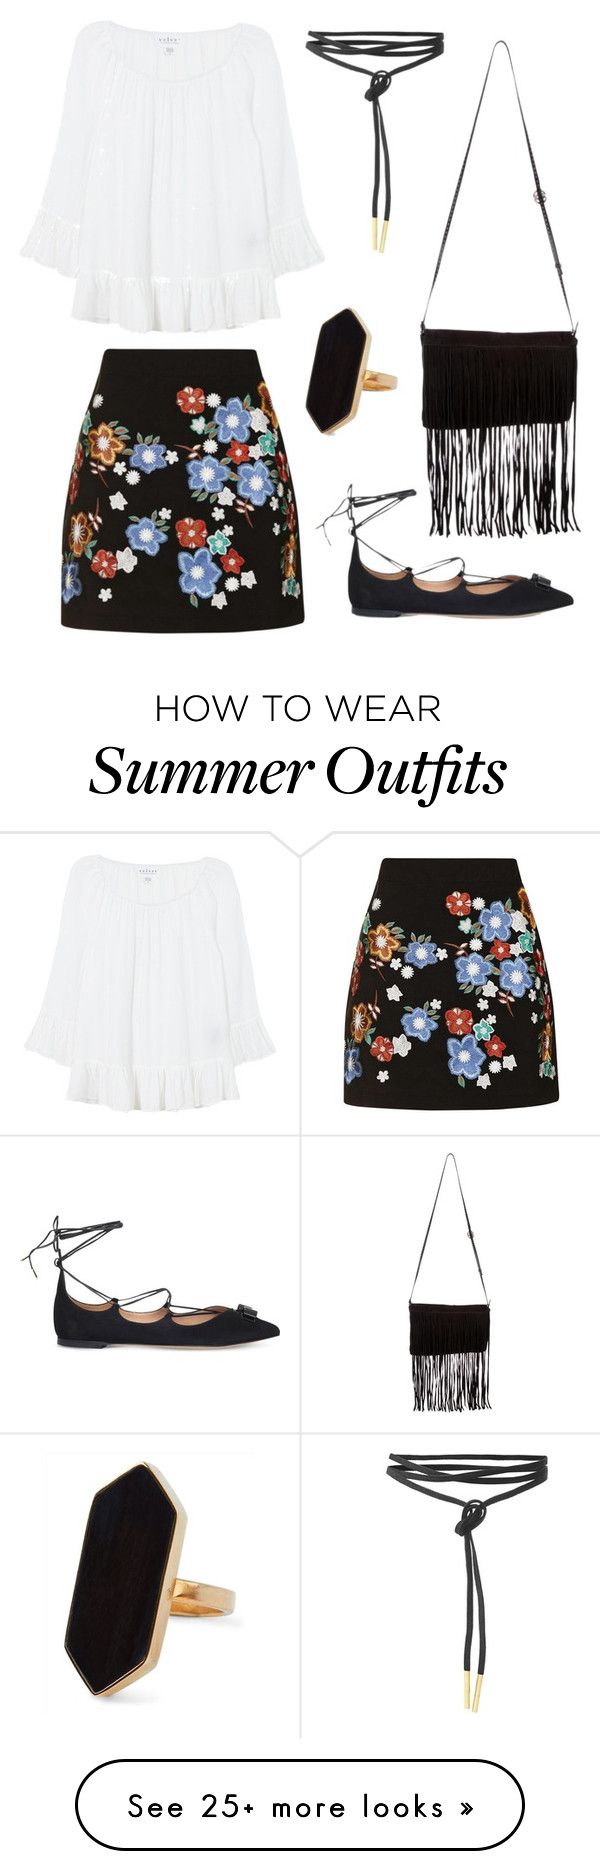 "Summer Date Outfit" by roses-s on Polyvore featuring Topshop, Velvet,...